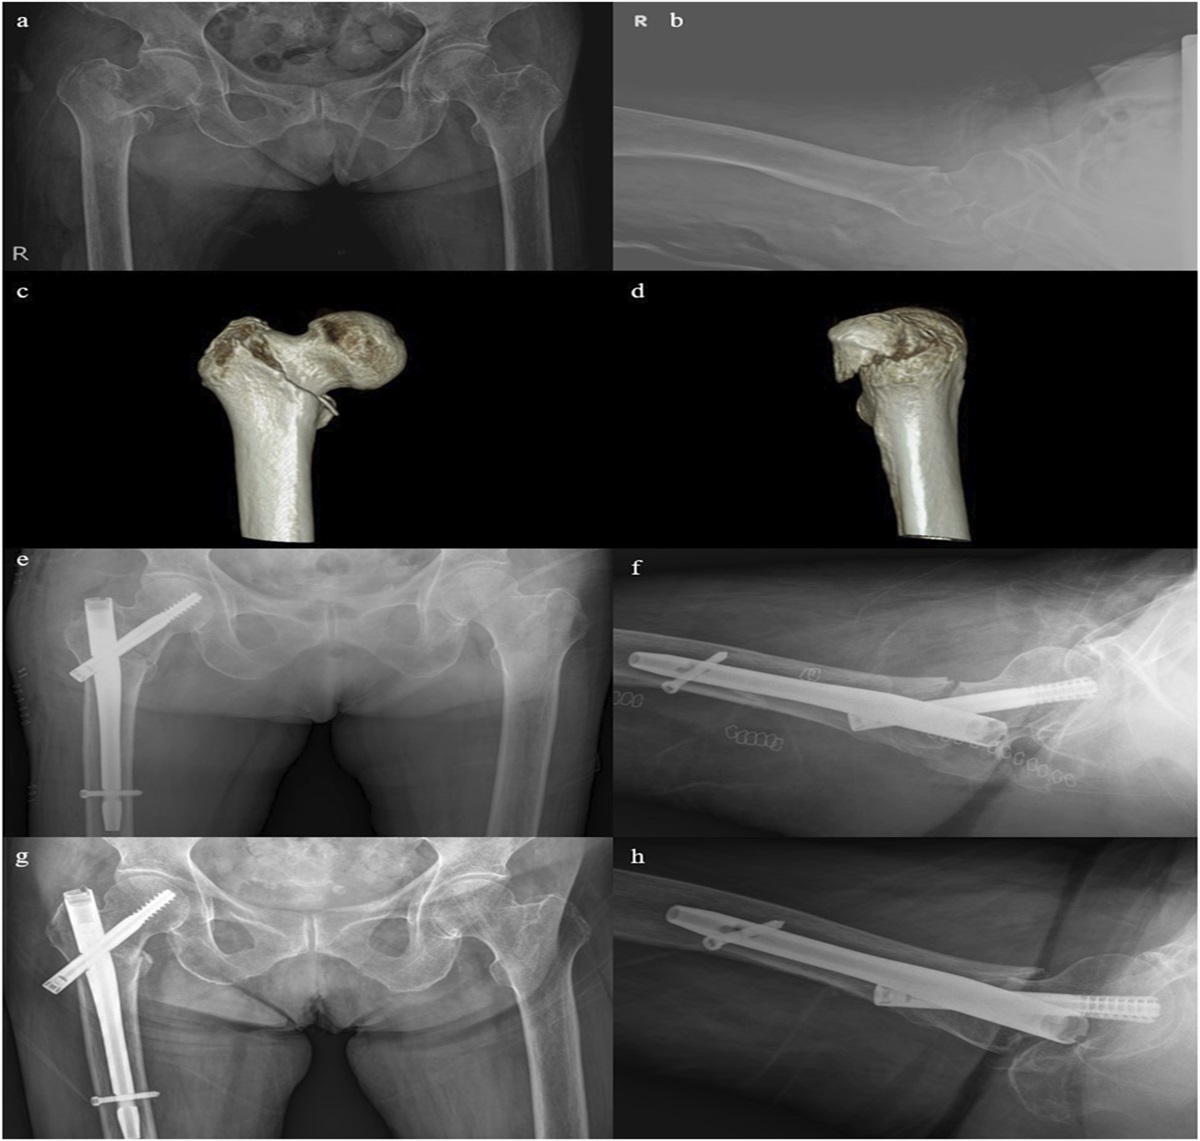 Intramedullary Impaction of the Basicervical Component Is Determinant of Fixation Failure in a Simple Two-Part Pertrochanteric Fracture